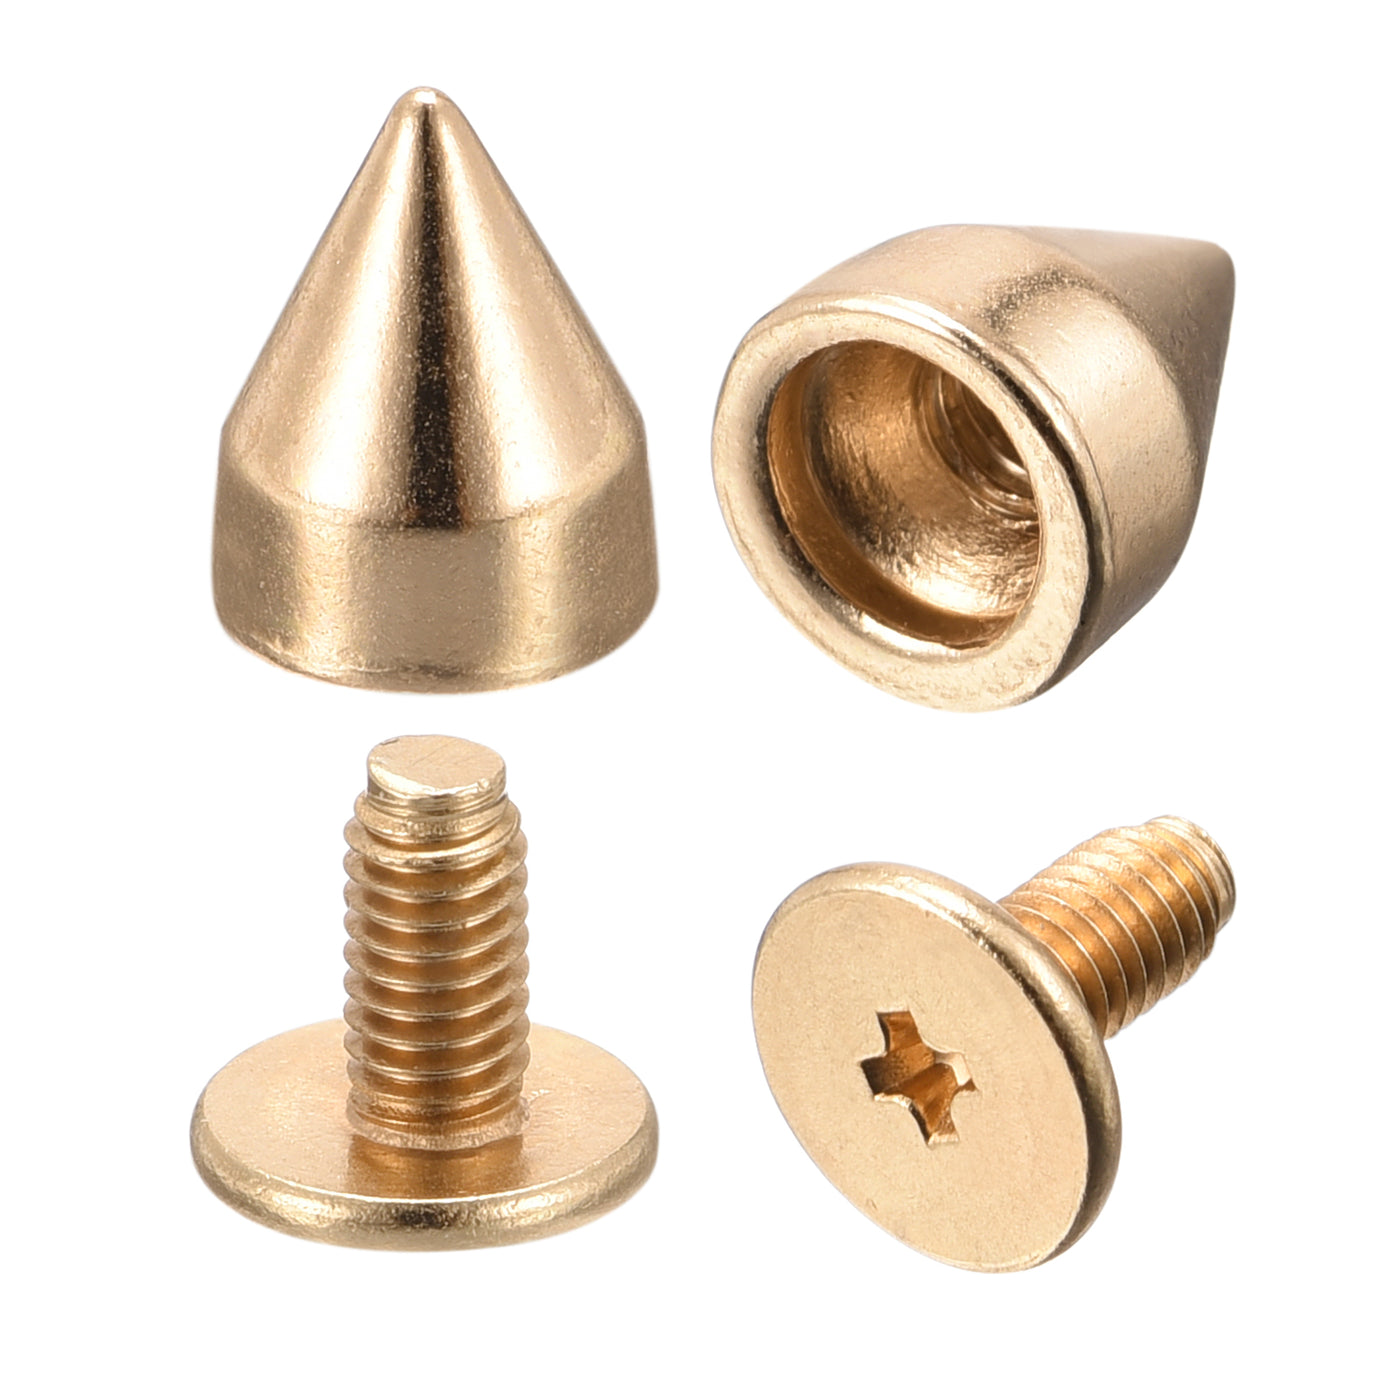 Uxcell Uxcell 7x8.5mm Screw Back Stud Rivets Spikes Zinc Alloy for DIY Silver Tone 30 Sets